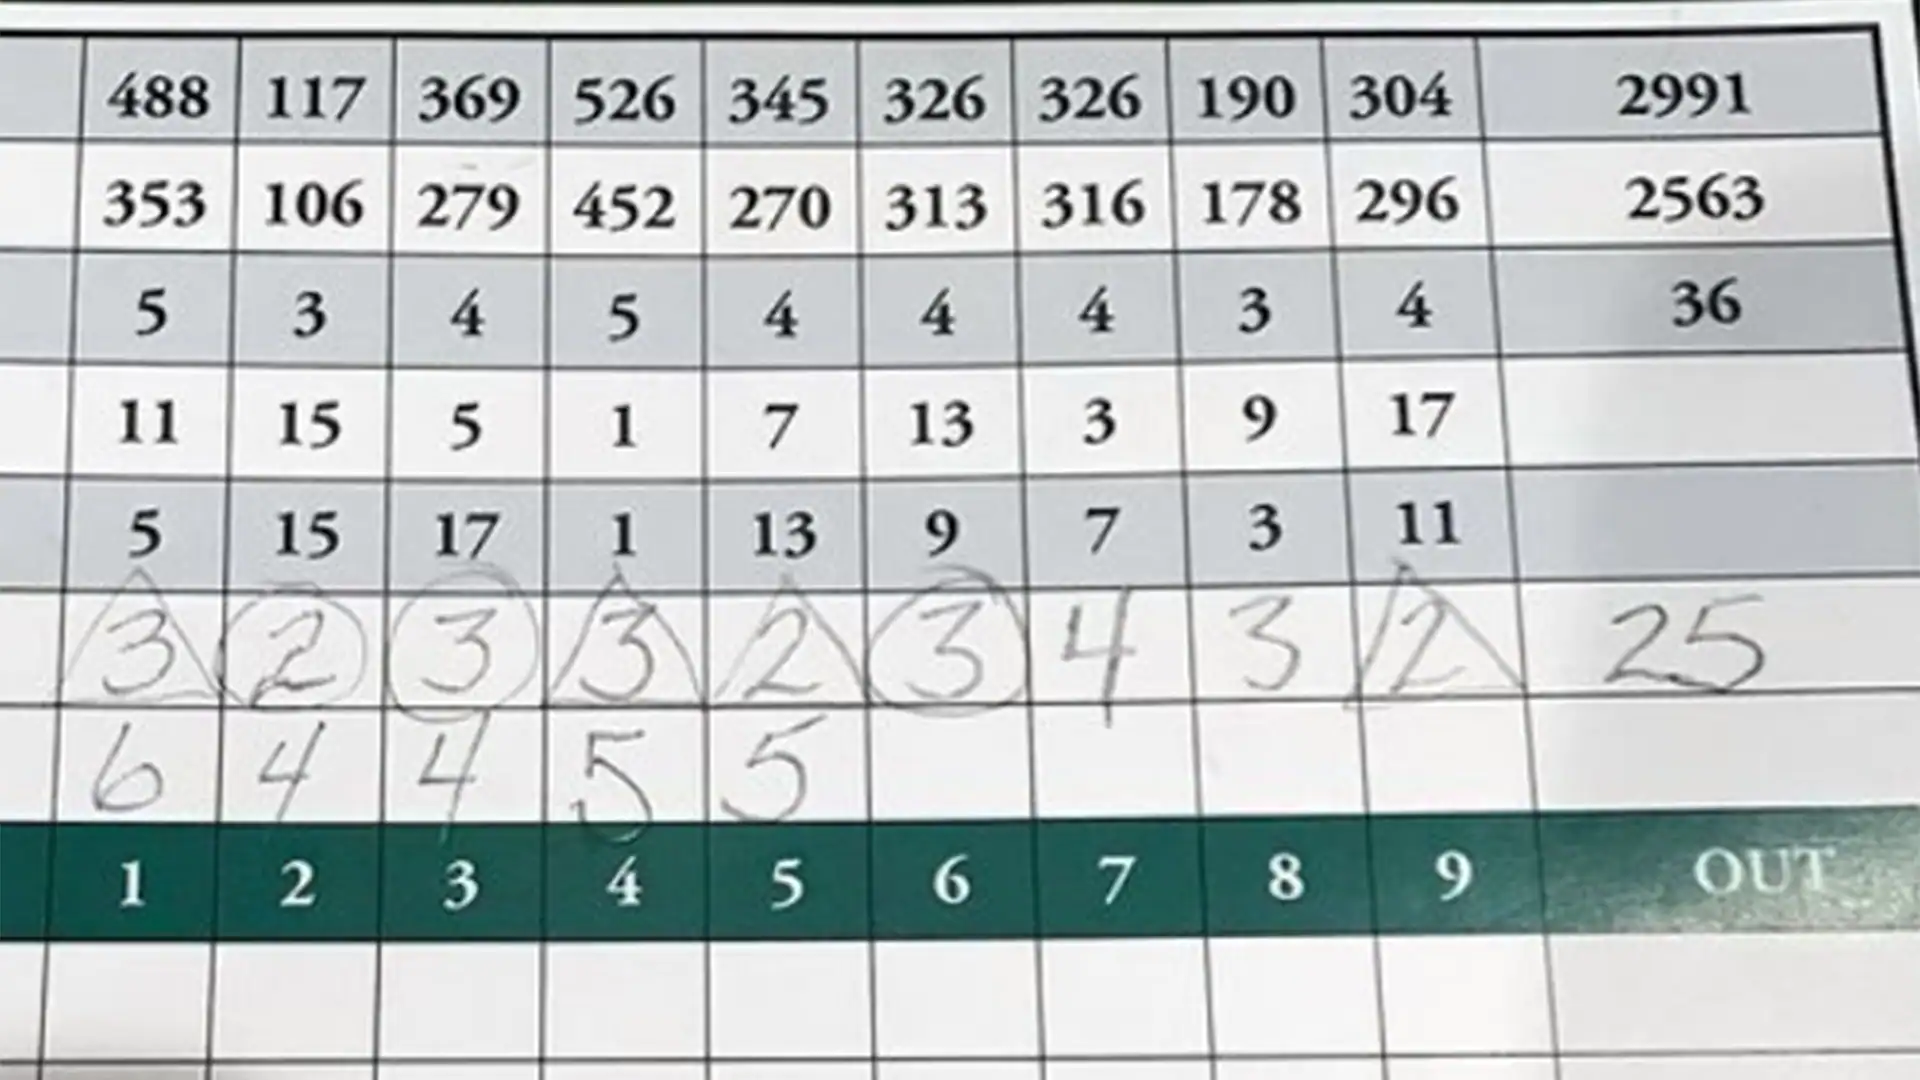 Michigan man shoots 17-under 55, featuring a front-nine 25